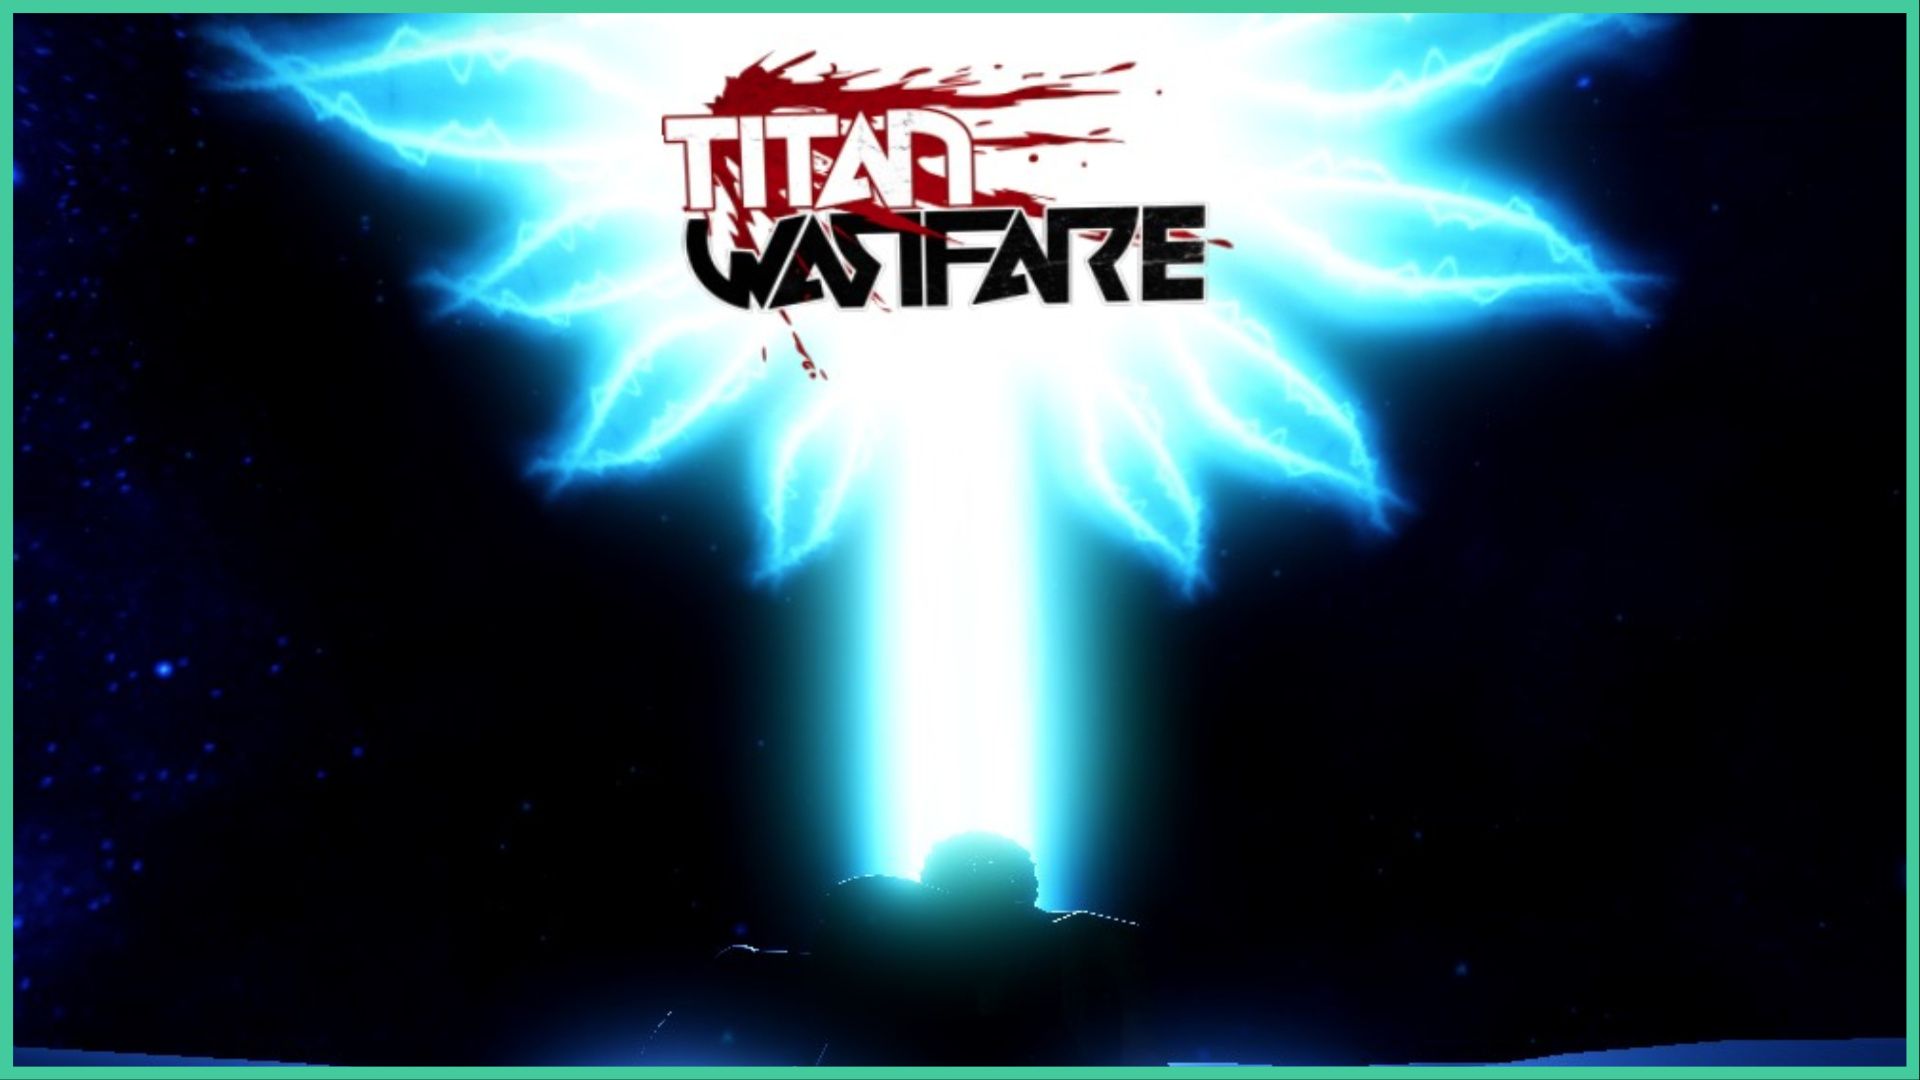 feature image for our titan warfare bloodlines tier list, the image features a screenshot of the main menu screen, as a character stands under a glowing bright beam of light that explodes in the sky as the game's logo appears on top of it with a blood splatter